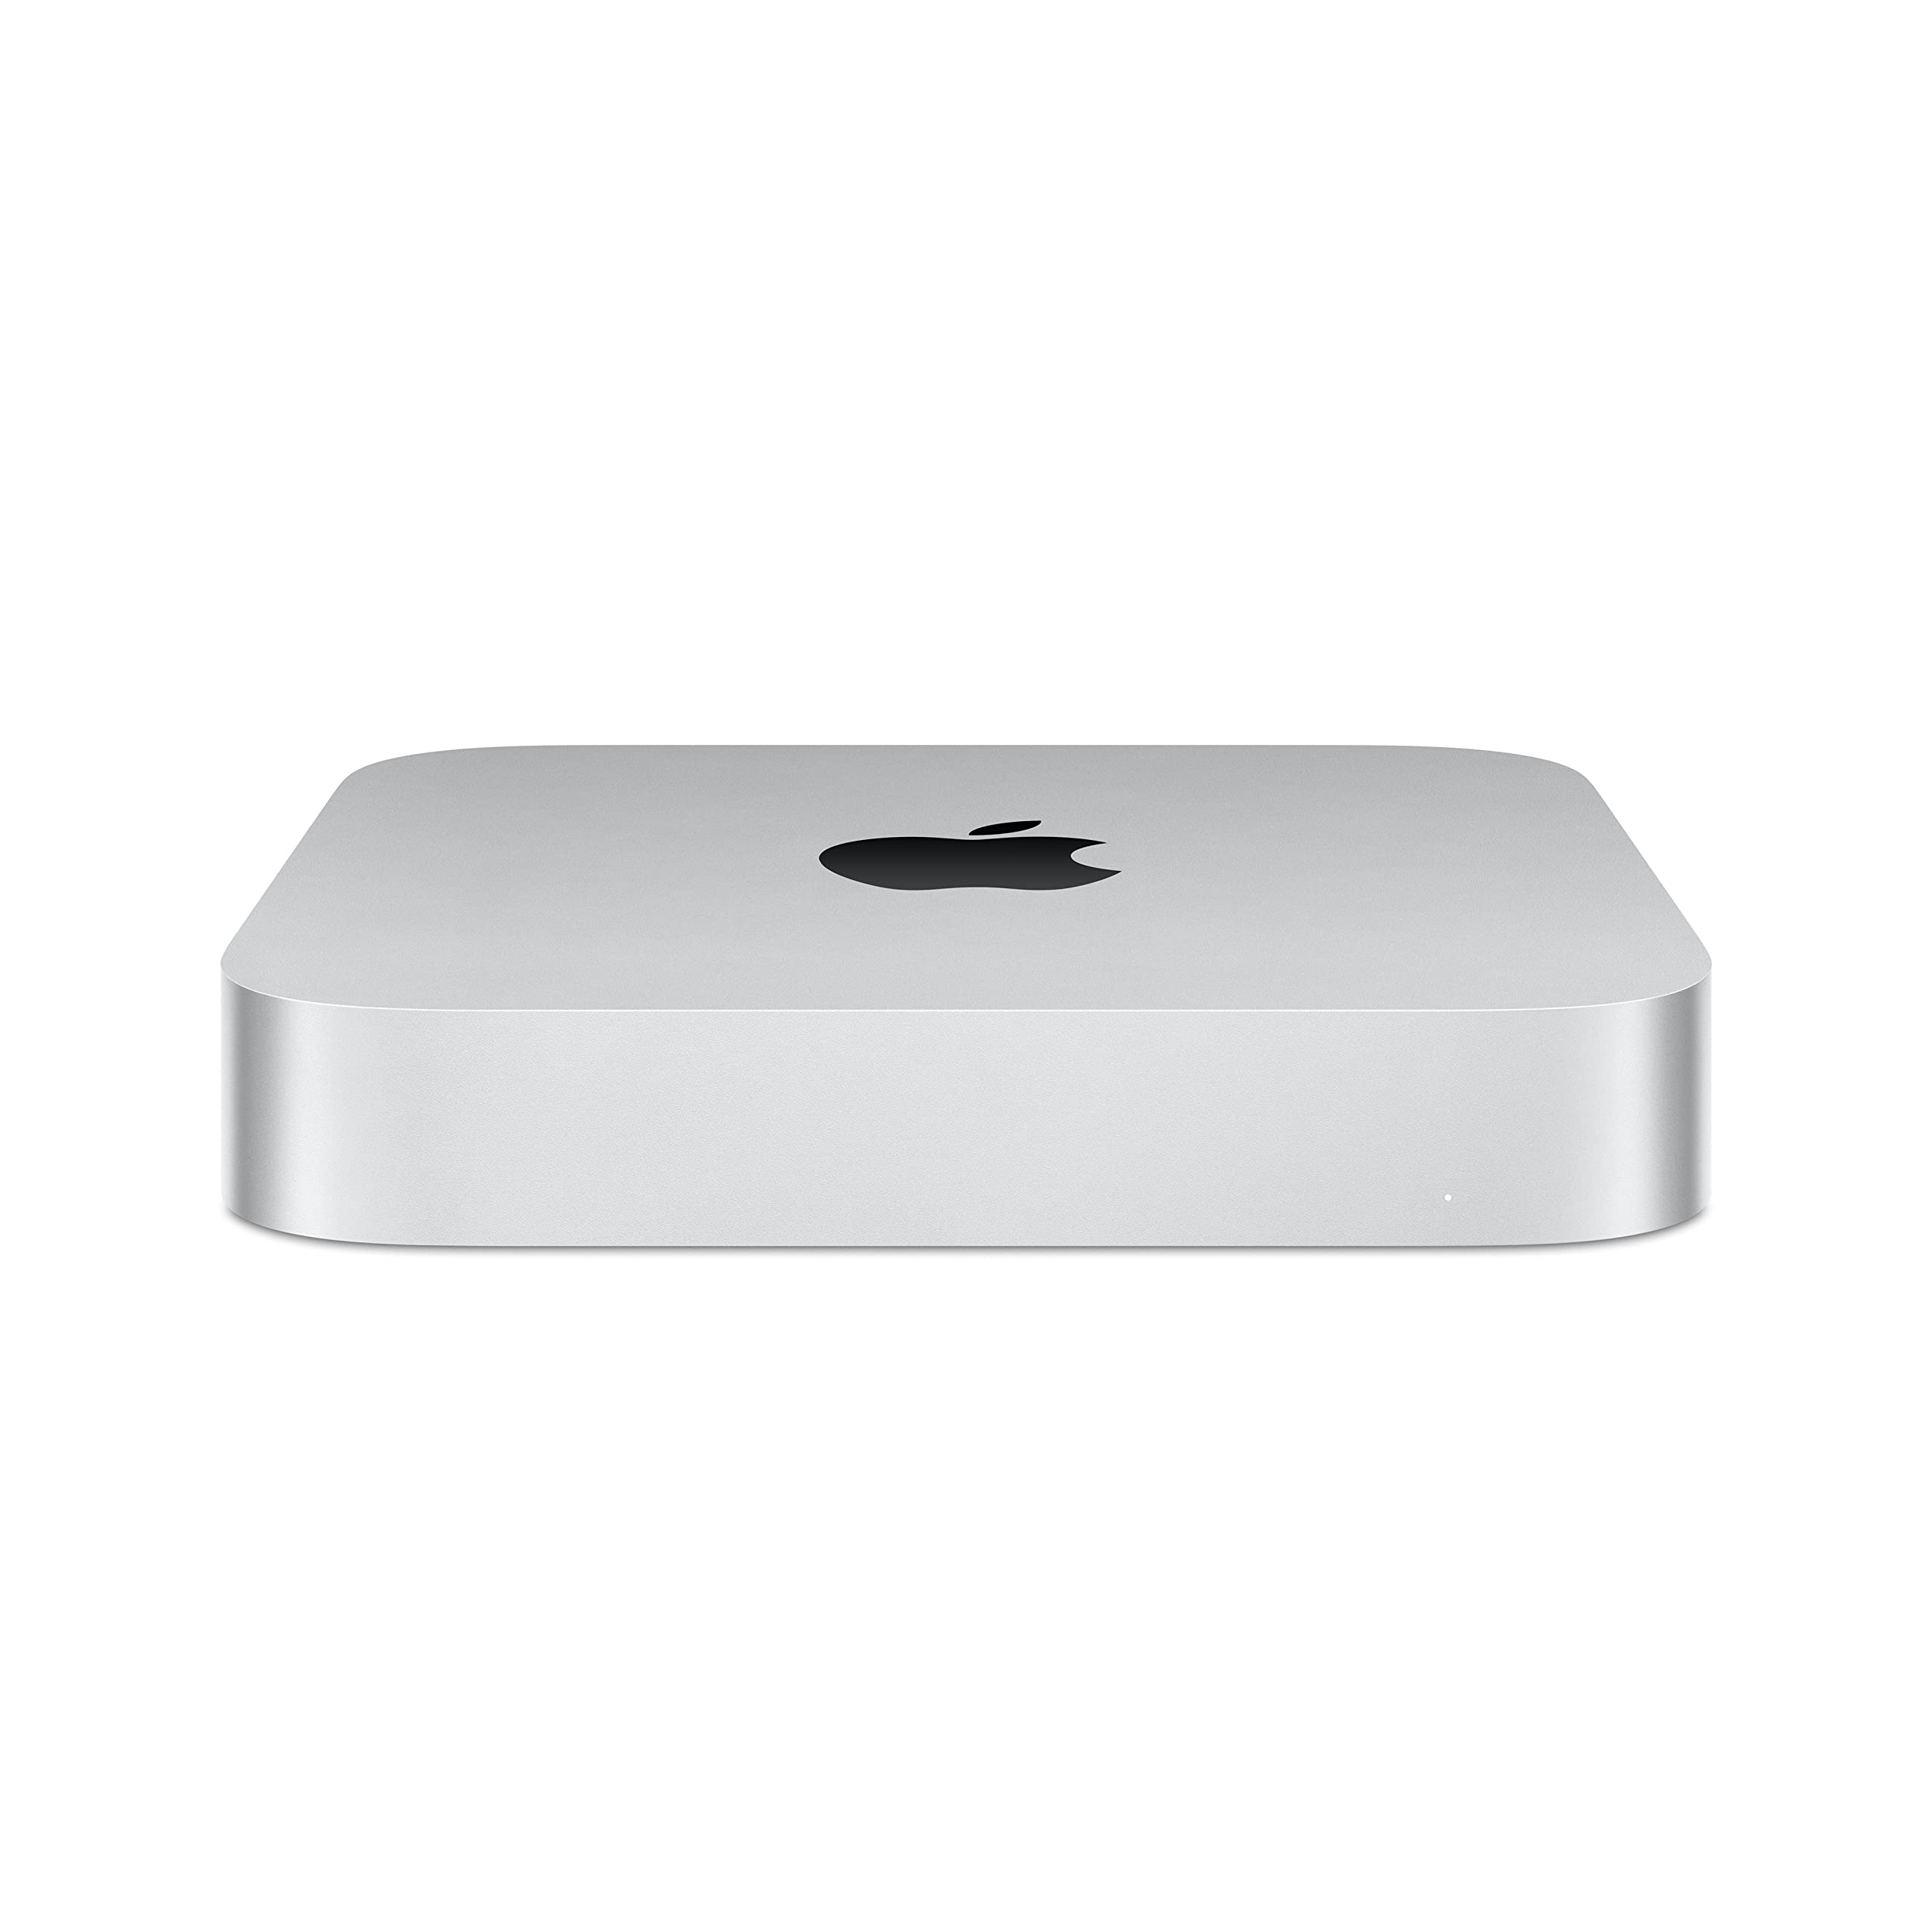 Apple 2023 Mac Mini Desktop Computer M2 chip with 8‑core CPU and 10‑core GPU, 8GB Unified Memory, 512GB SSD Storage, Gigabit Ethernet. Works with iPhone/iPad